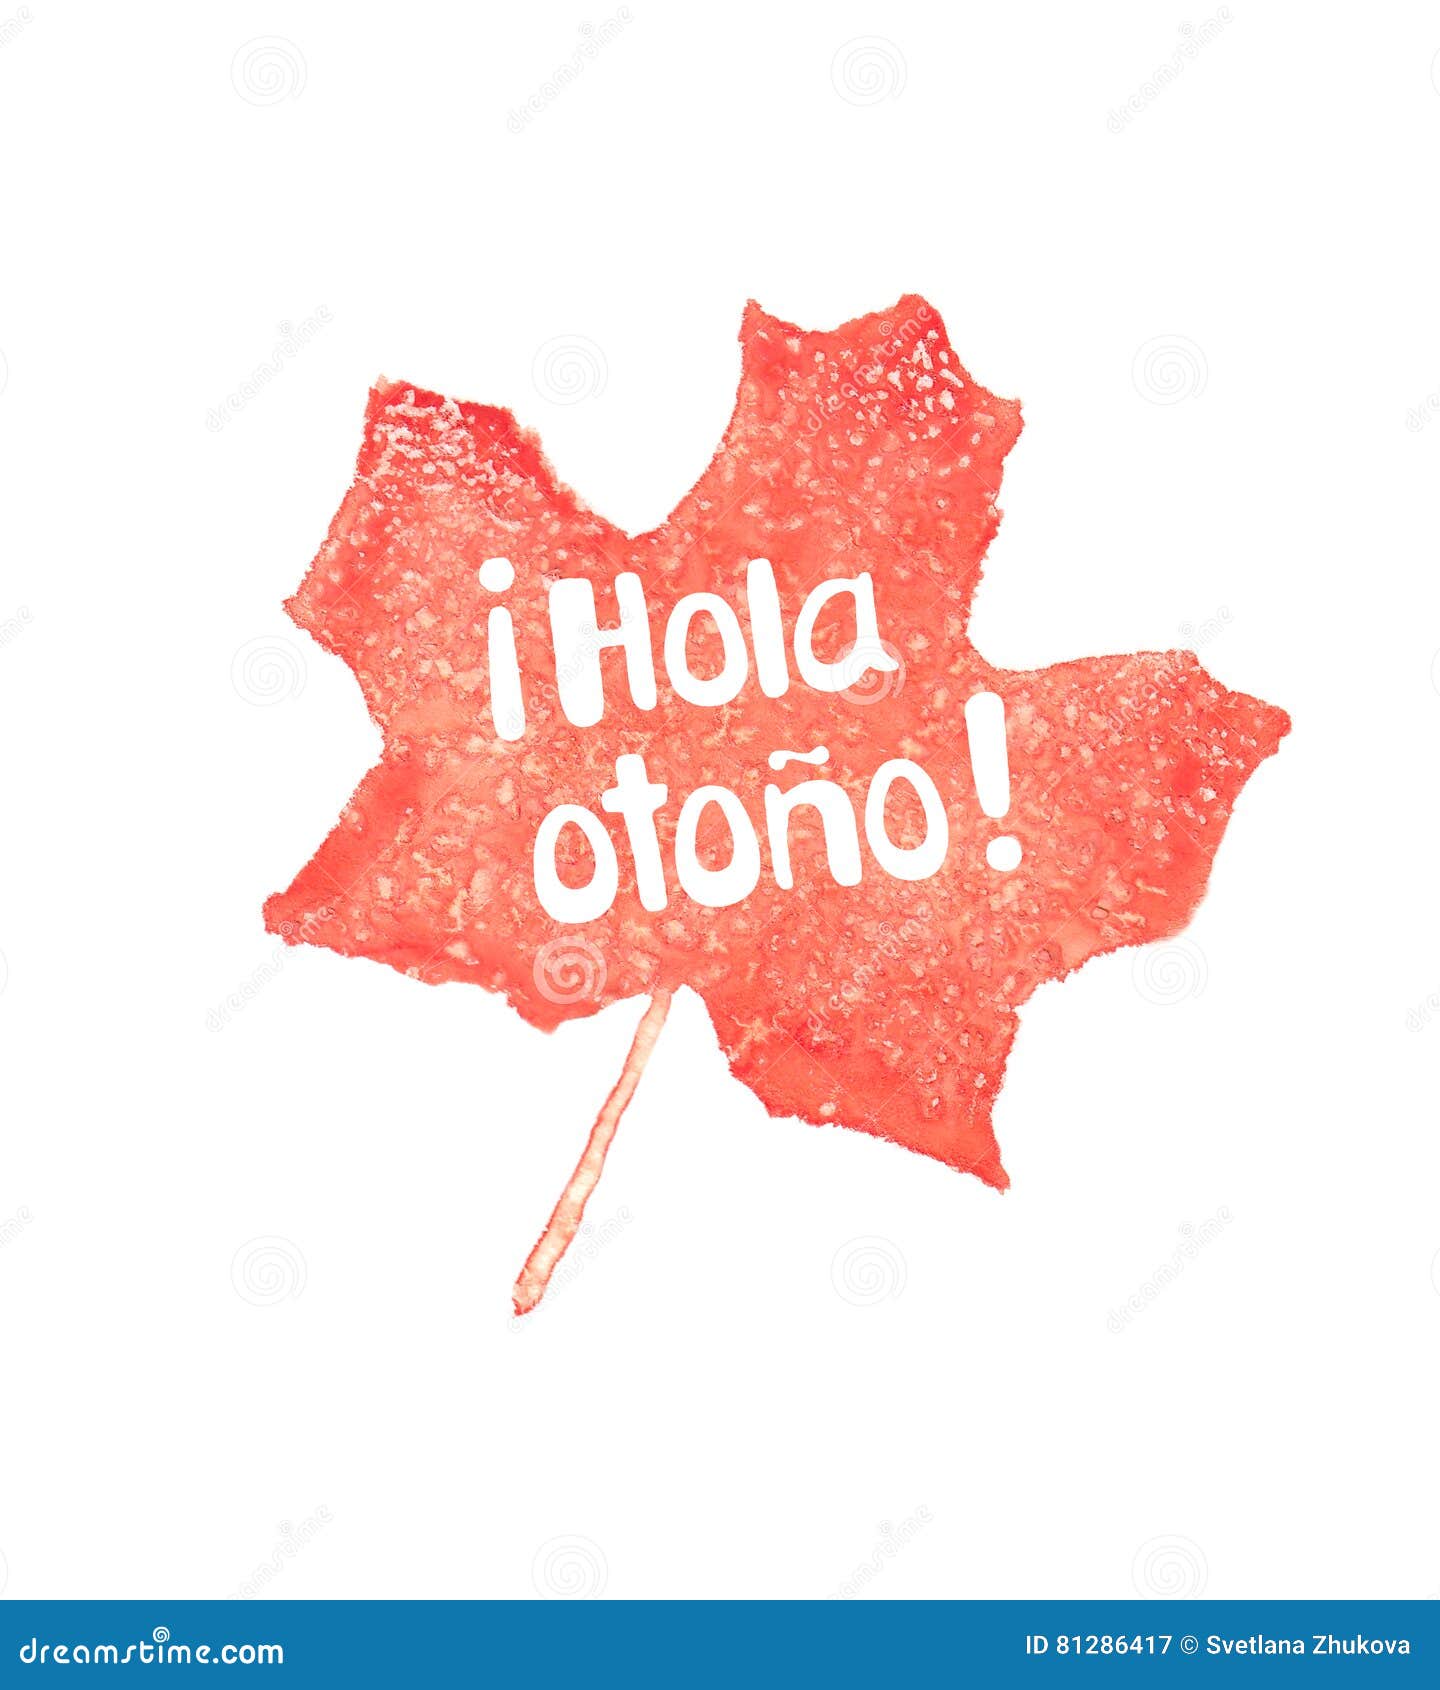 hola otono watercolor hand drawn lettering on the maple leaf